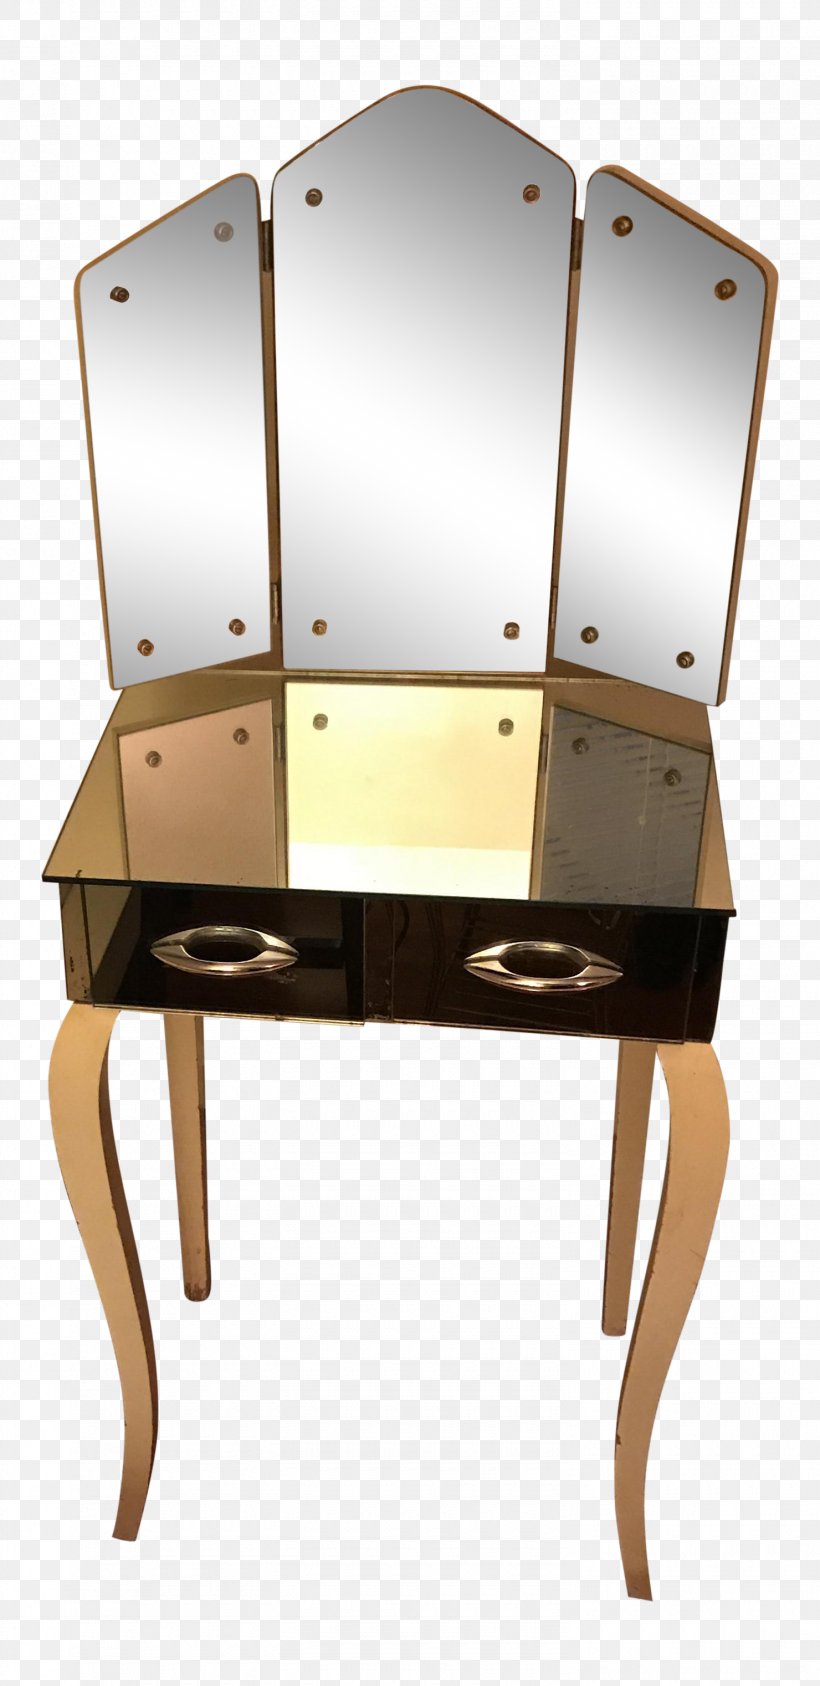 Angle Chair, PNG, 1480x3044px, Chair, Furniture, Table Download Free